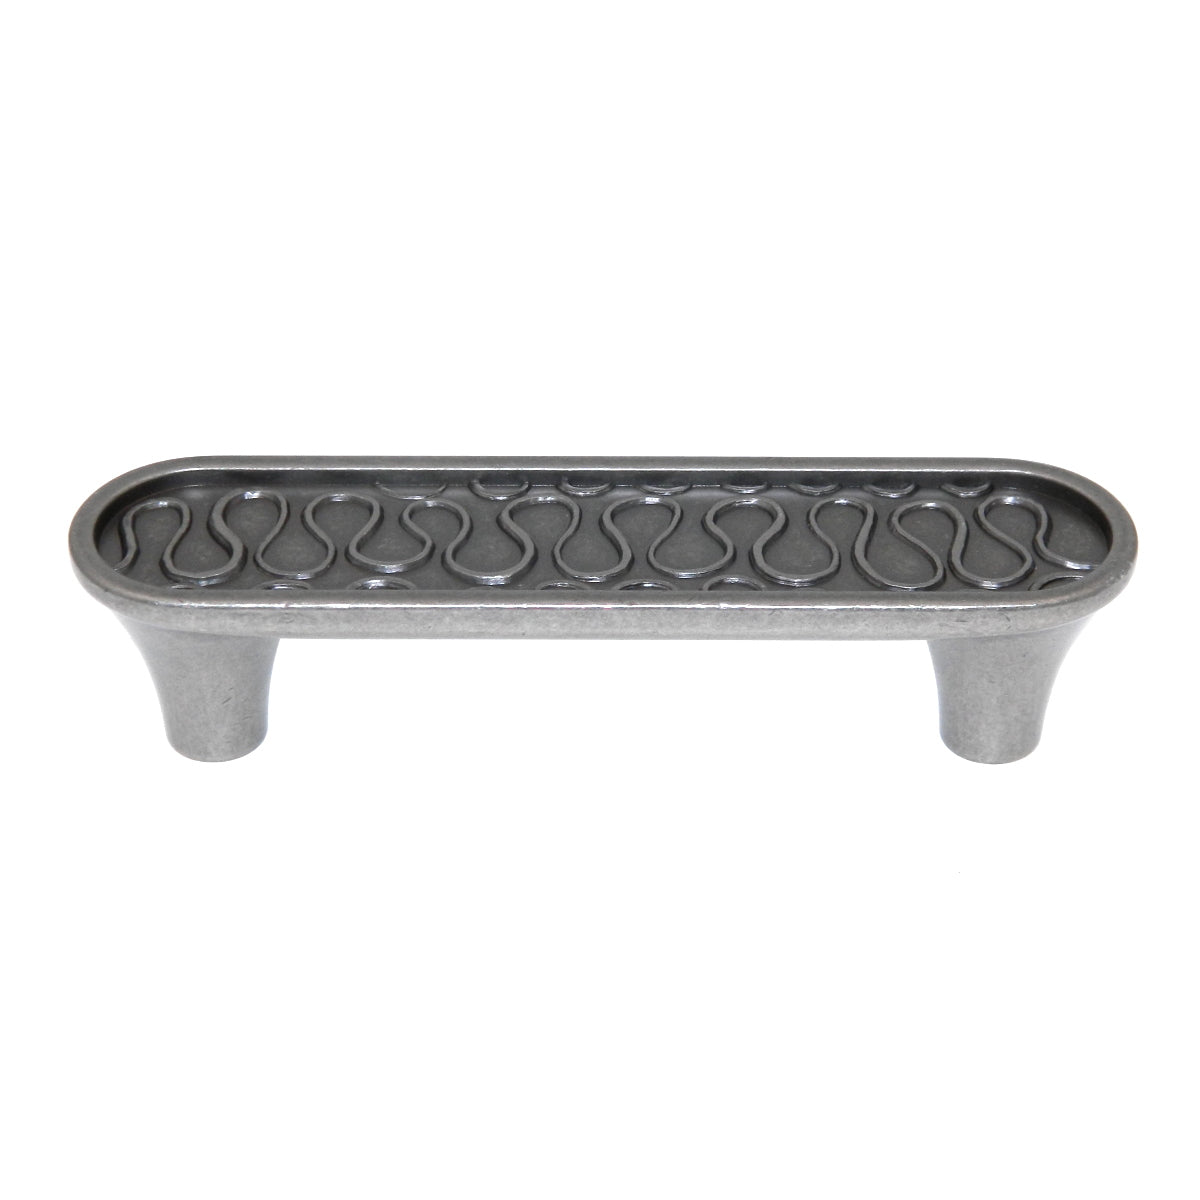 Amerock Playful Nature Weathered Nickel Flat Oblong 3" Arch Cabinet Handle Pull BP26112-WN